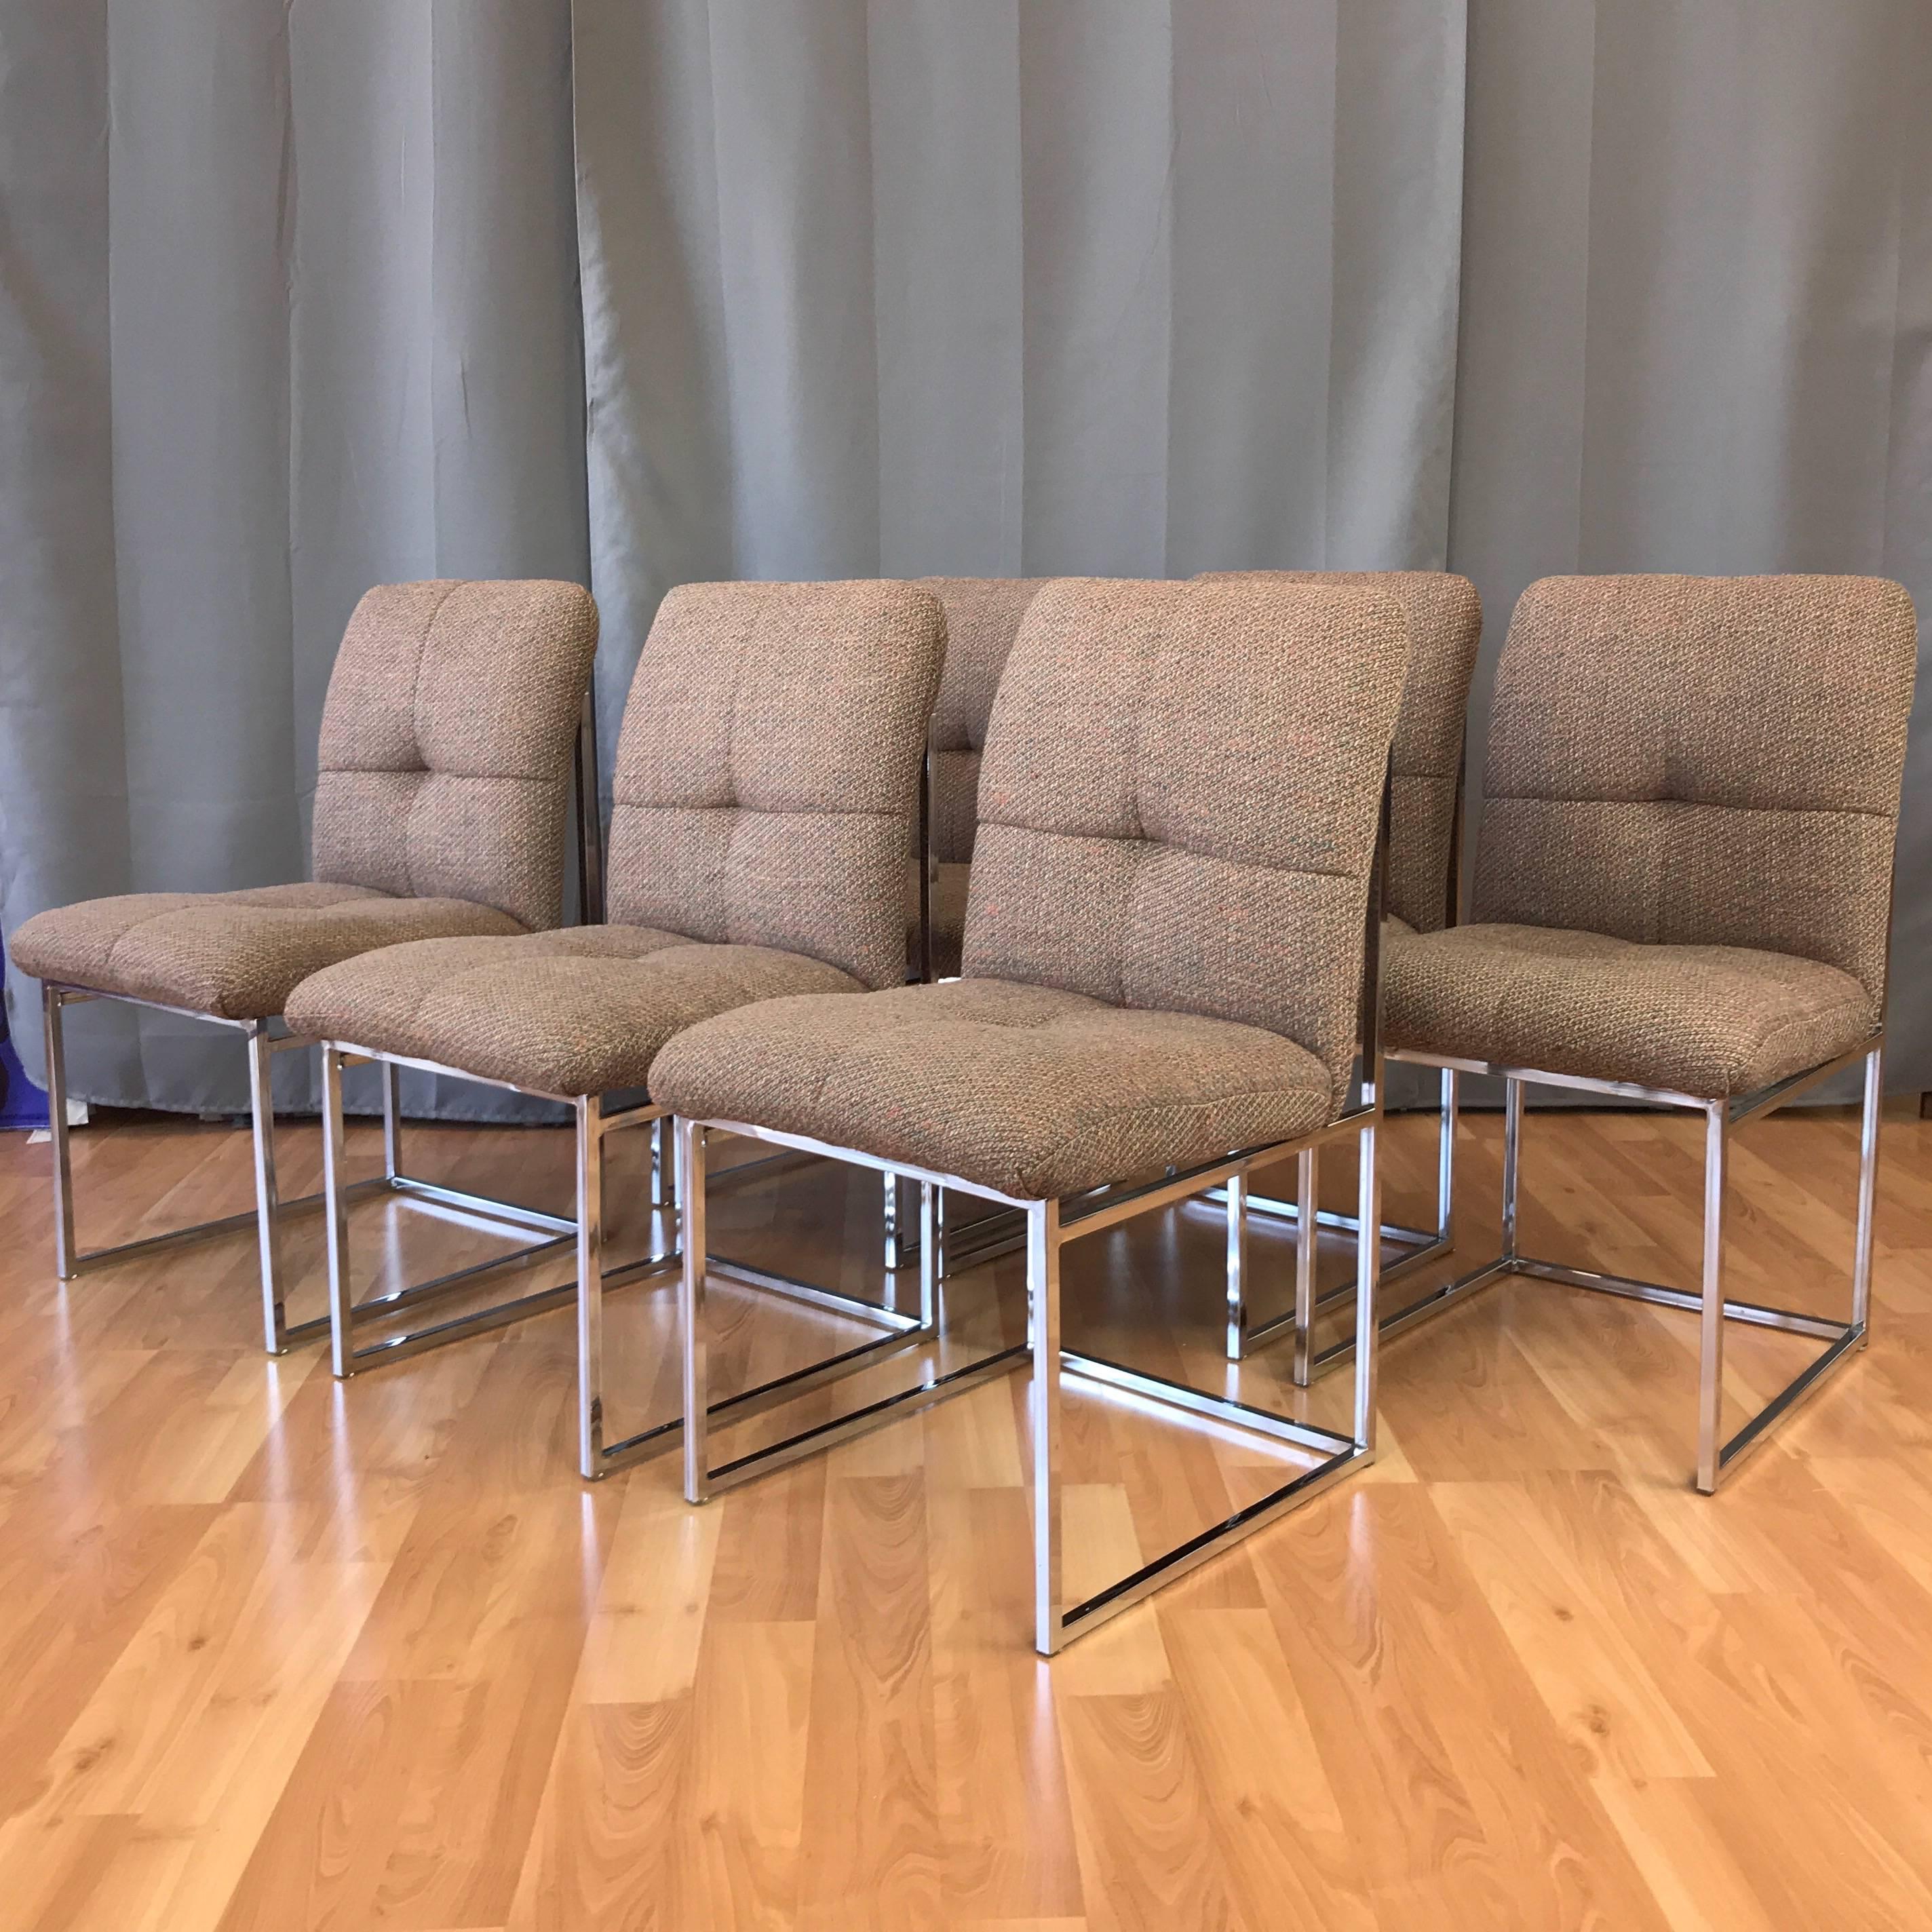 A set of six vintage no. 1187-110 dining or side chairs by Milo Baughman for Thayer Coggin.

Perfectly proportioned polished stainless steel frame features thin geometric lines. Ergonomically angled seat in subdued multi-color original upholstery